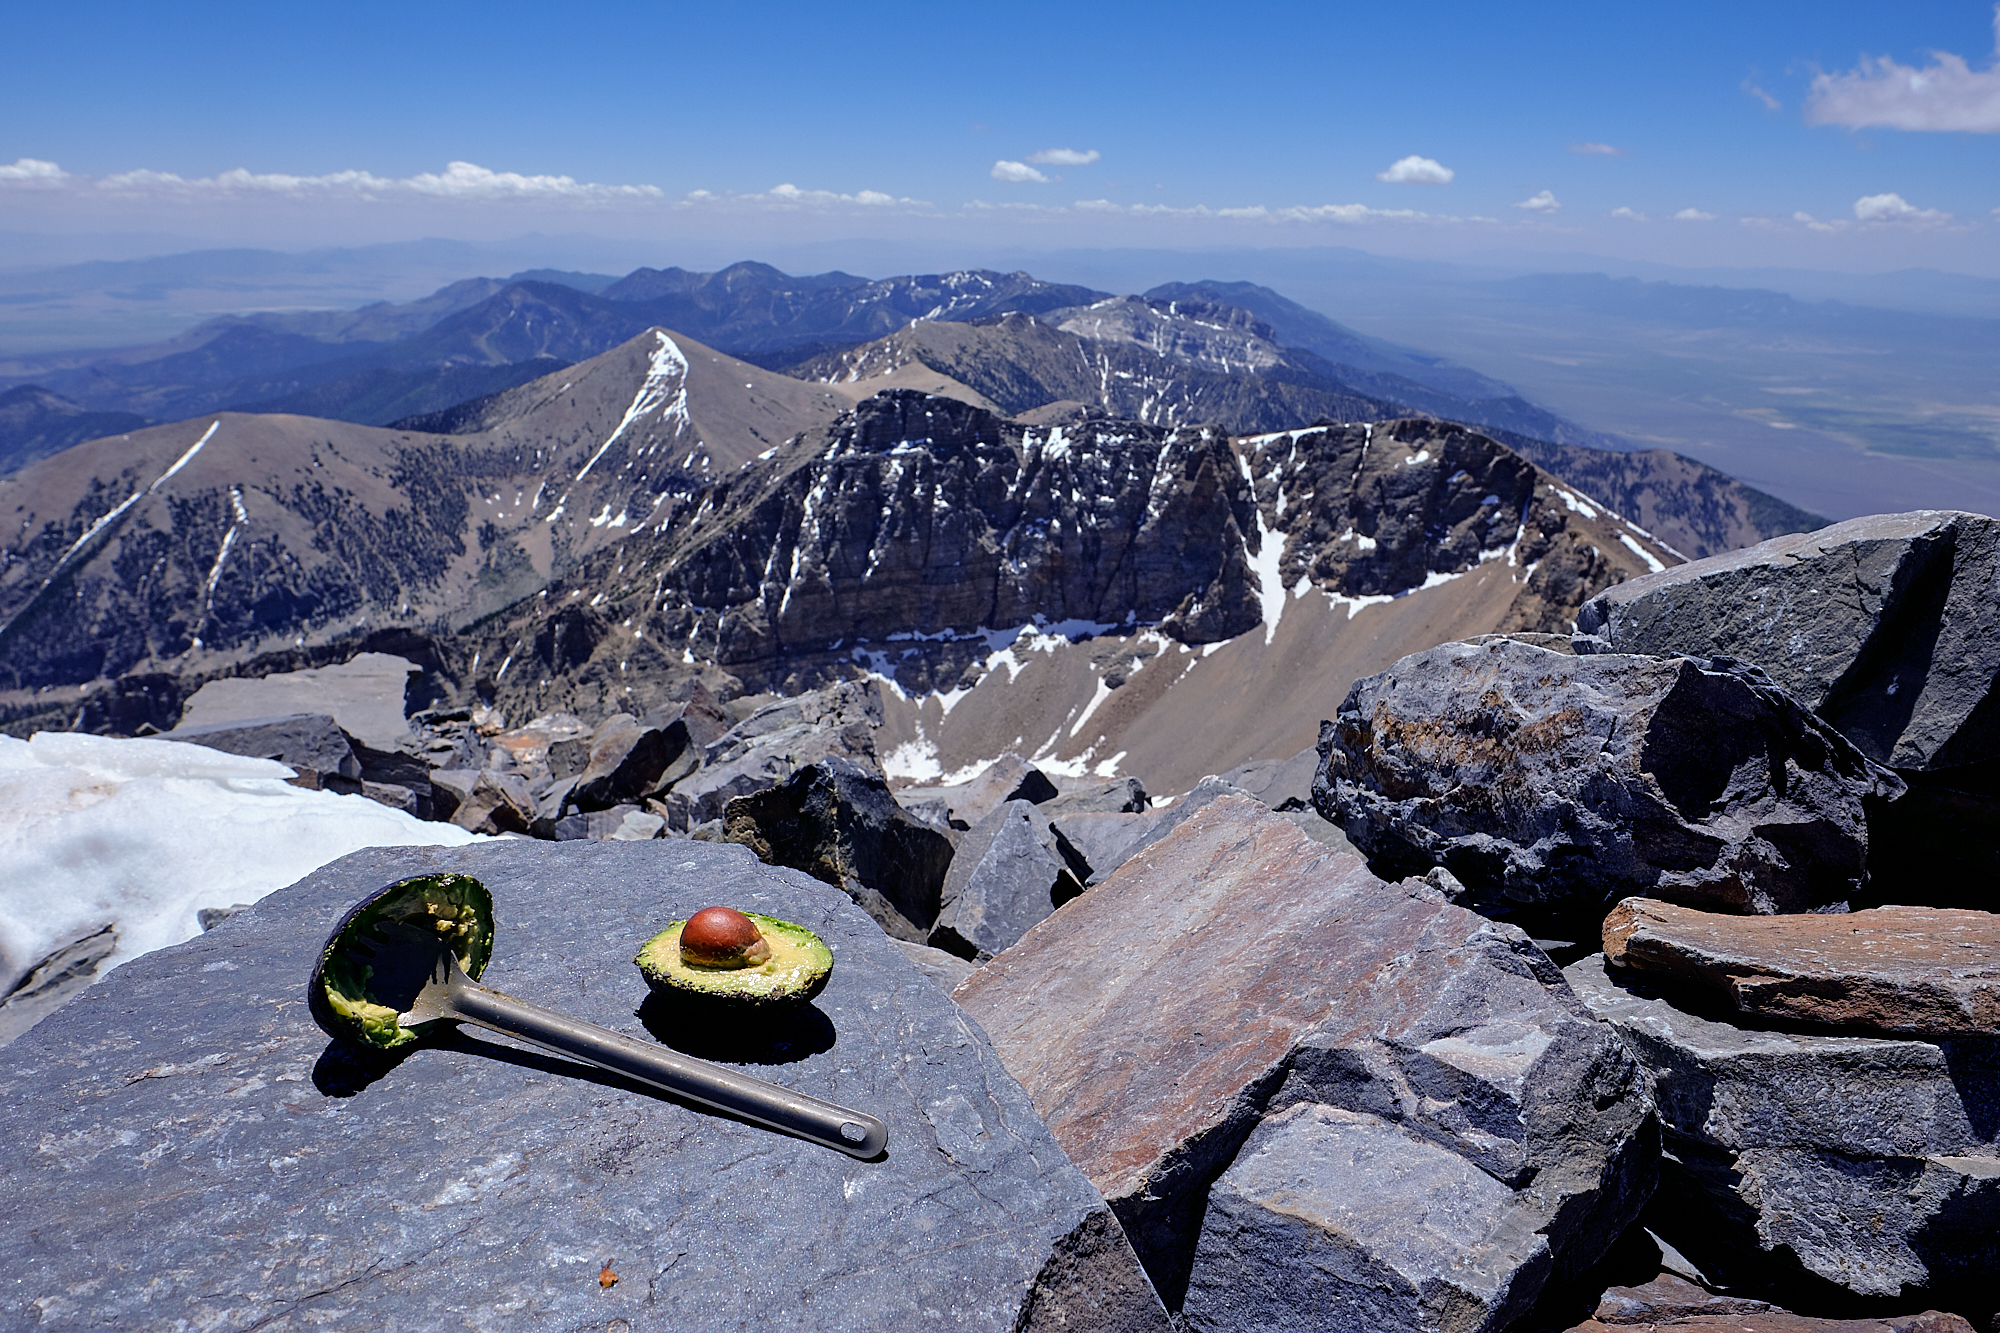  On Wheeler Peak I munched on an avocado, which I believe was the highest avocado in the Great Basin if not the western United States. | Great Basin National Park, NV 6/16/18 